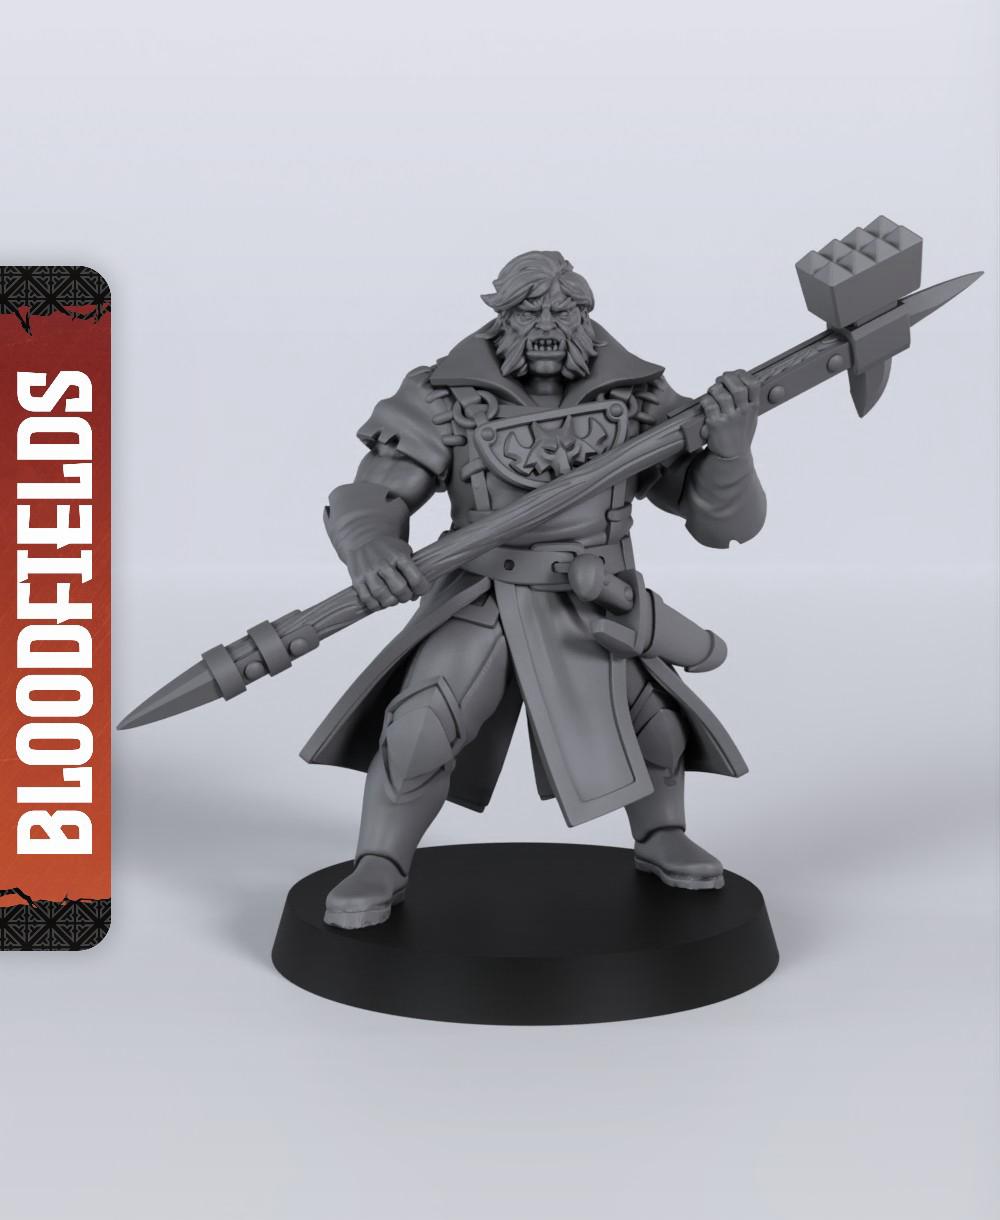 Brutus the General (Werebear) - With Free Dragon Warhammer - 5e DnD Inspired for RPG and Wargamers 3d model